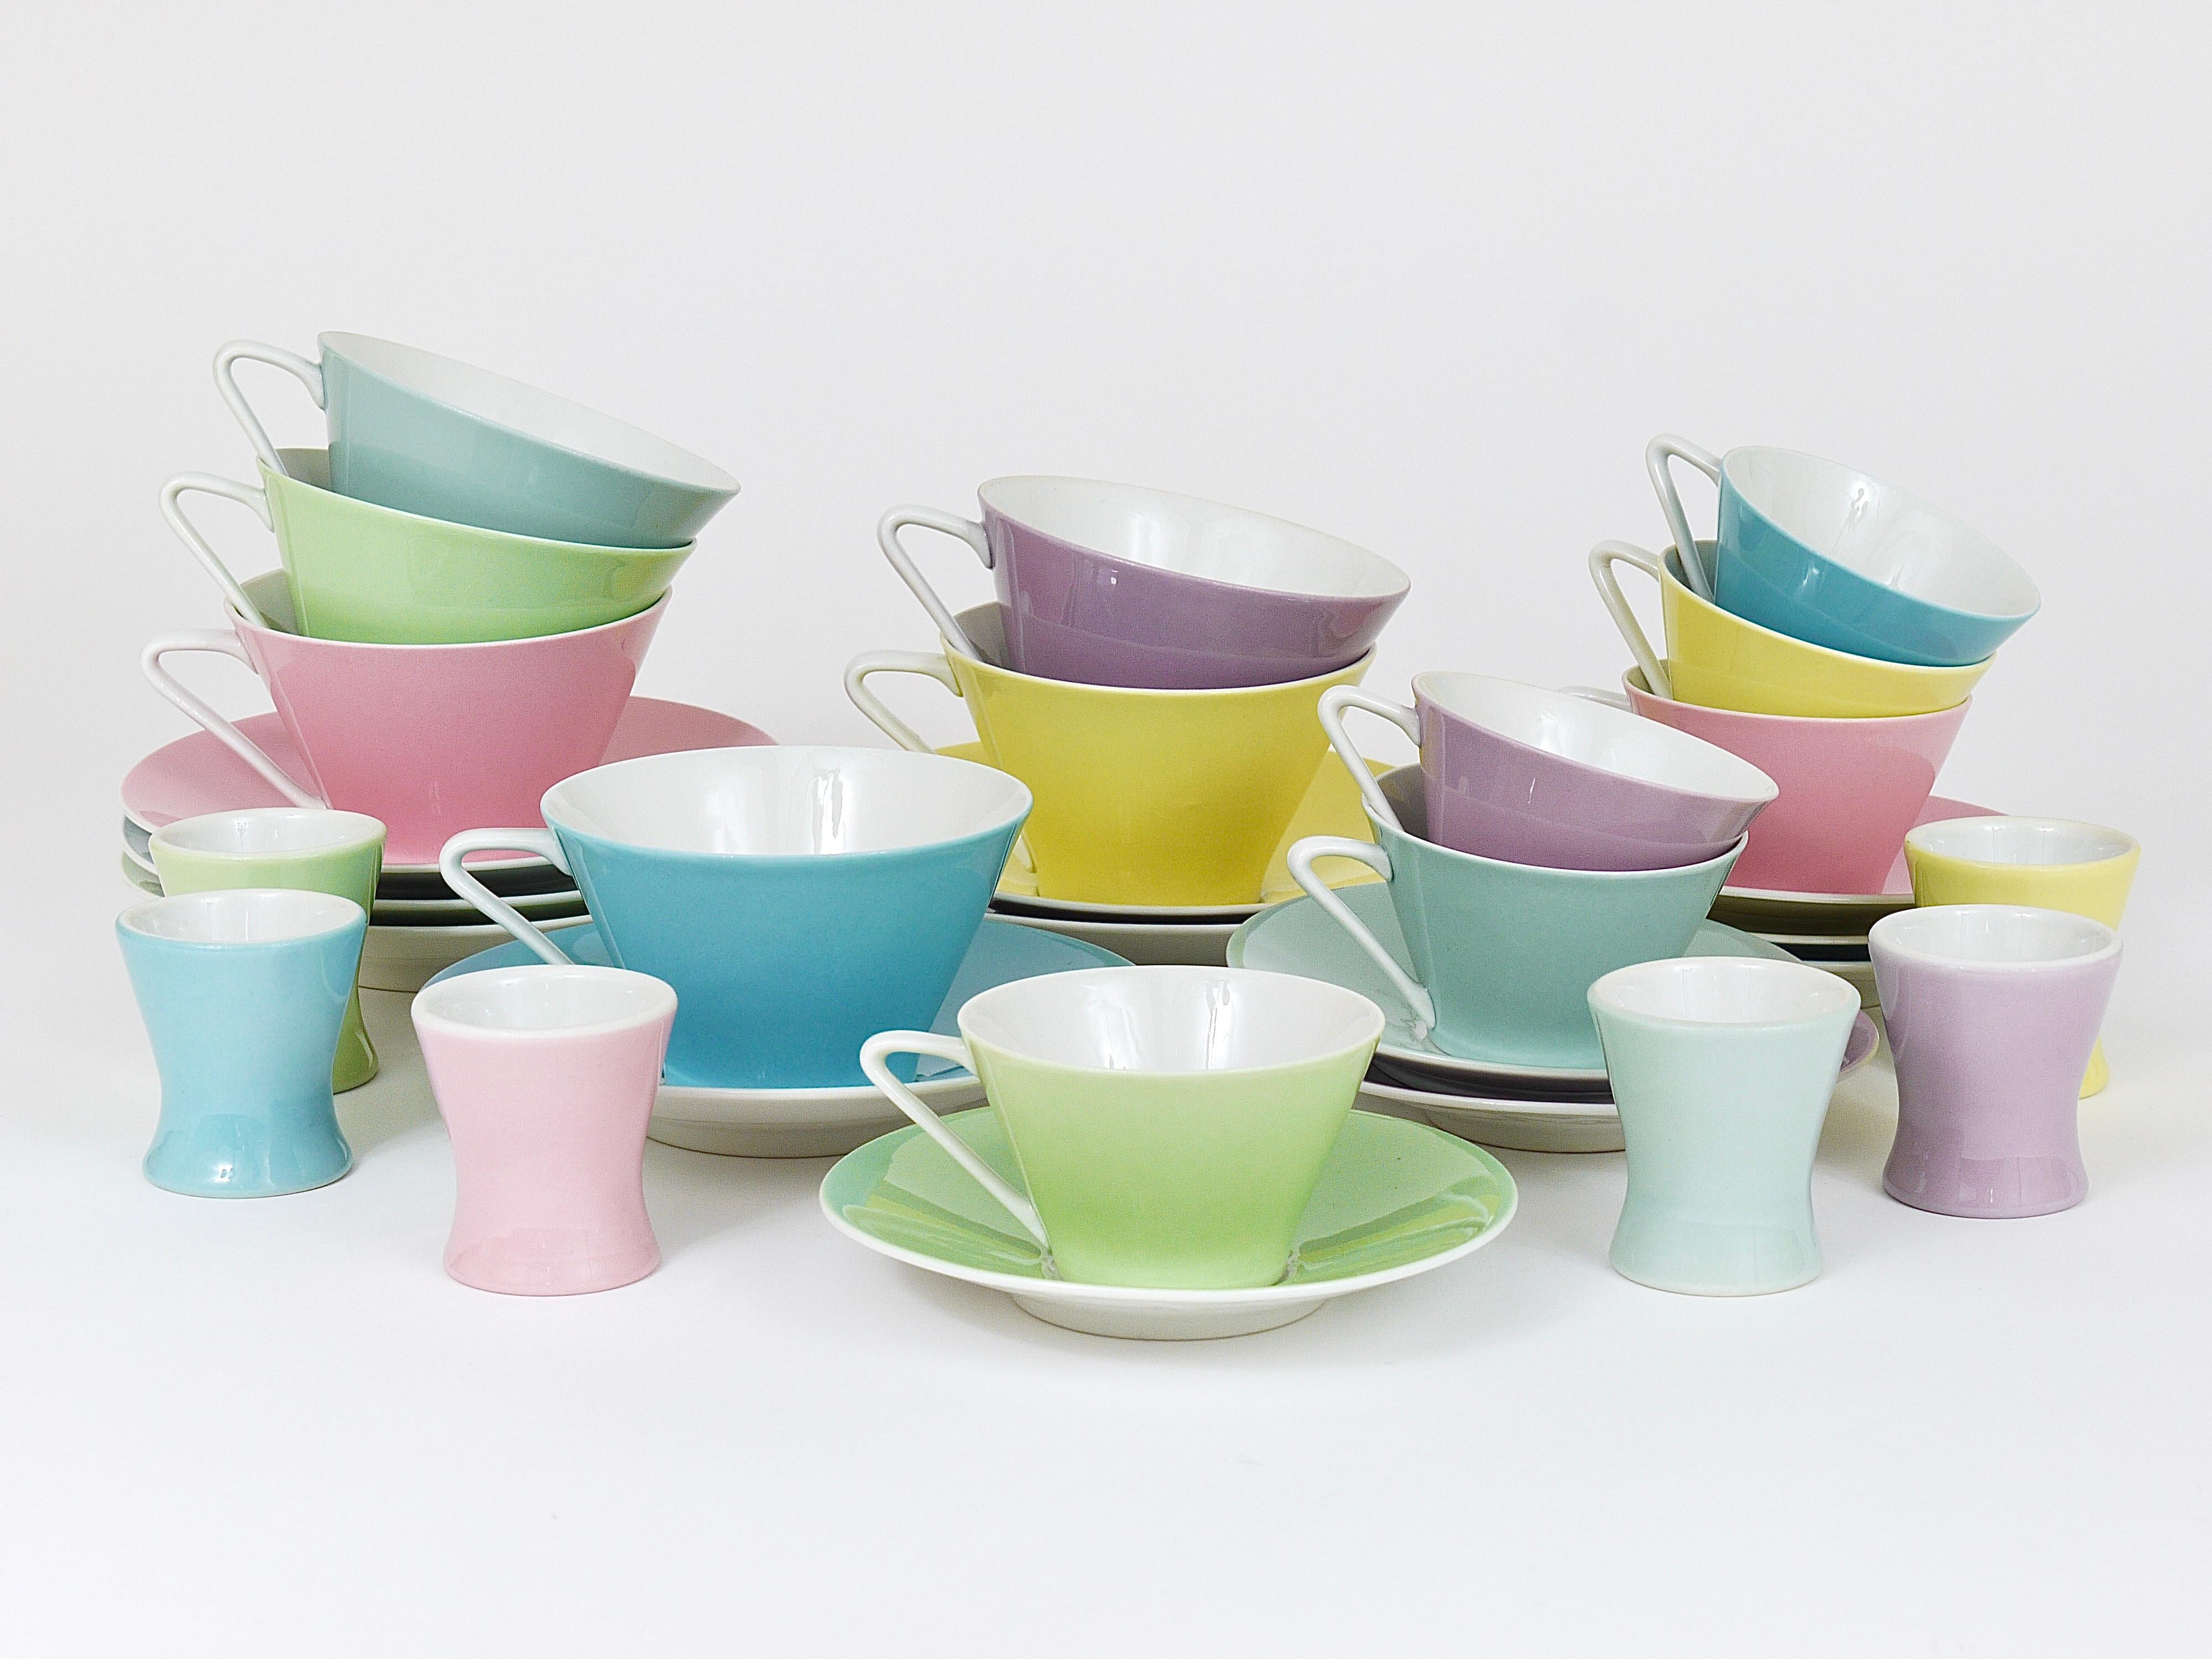 A set of six charming conical coffee cups and saucers from the „Daisy“-series, made of thin, fine china in six different lovely pastel colors, yellow, light blue, light green, bluegray, pink/rosé and lilac. Made in the 1950s by Lilien Porzellan